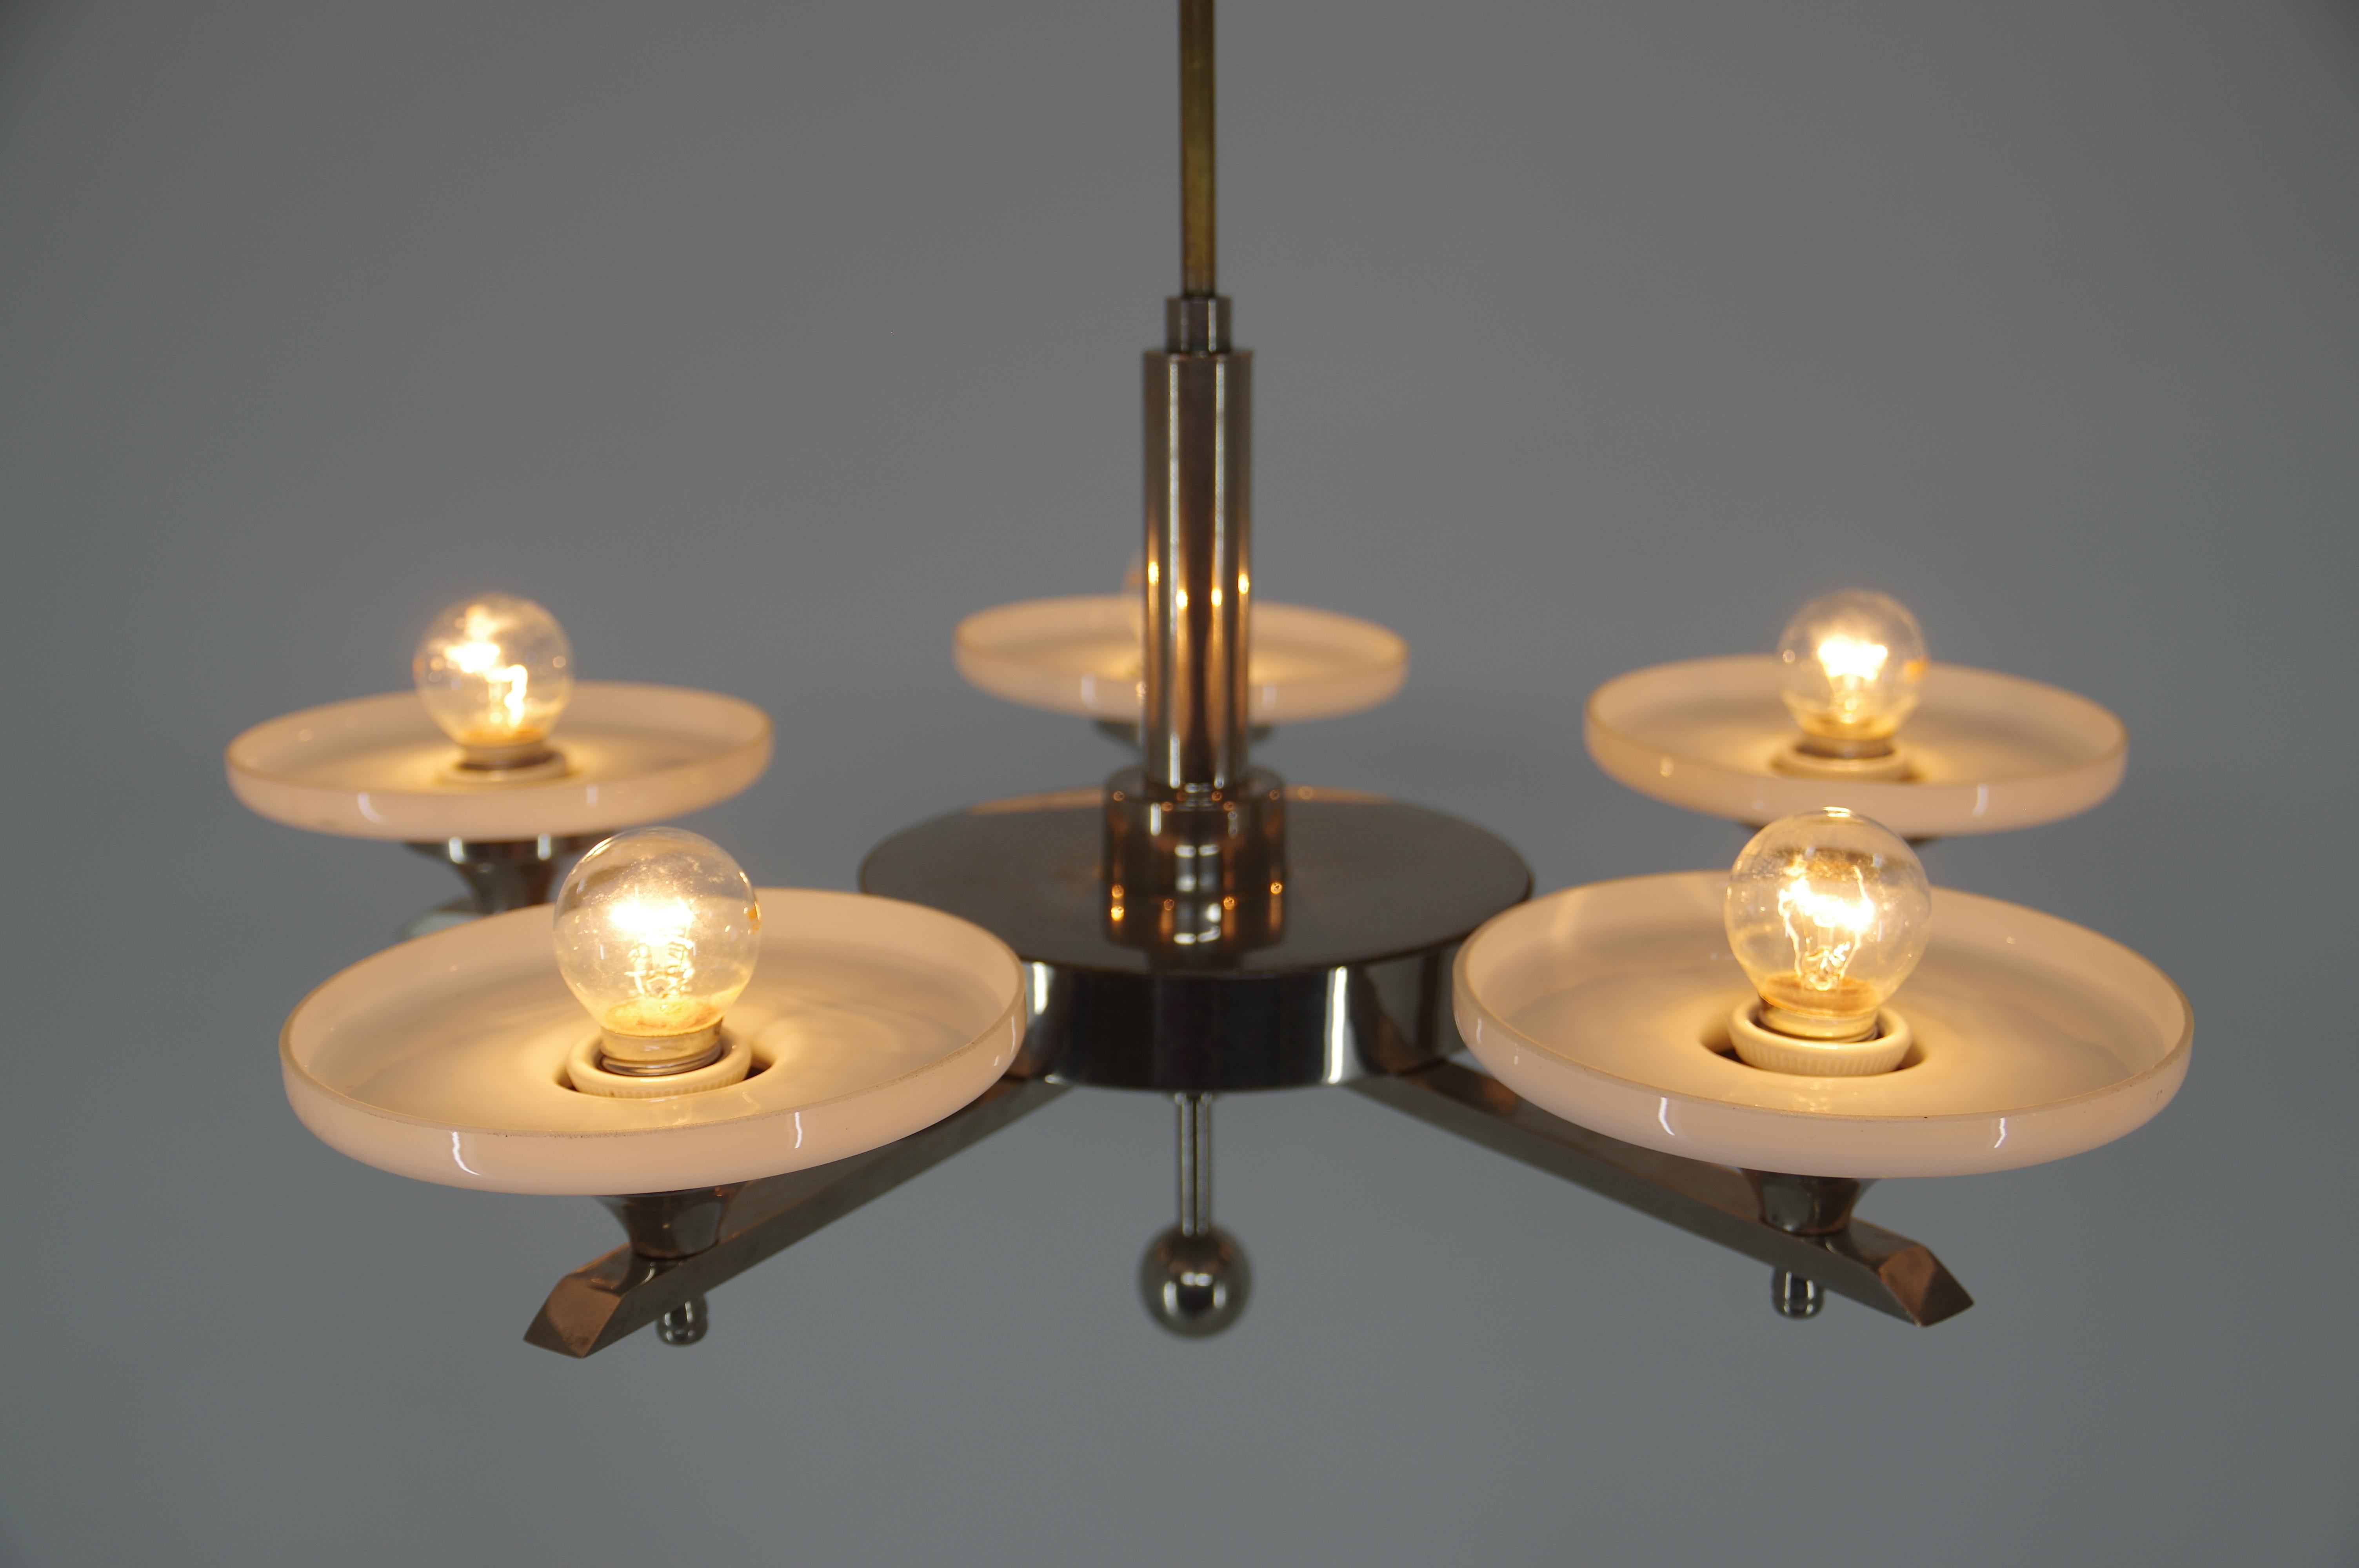 Opaline Glass Functionalist Chrome-Plated Chandelier, 1930s For Sale